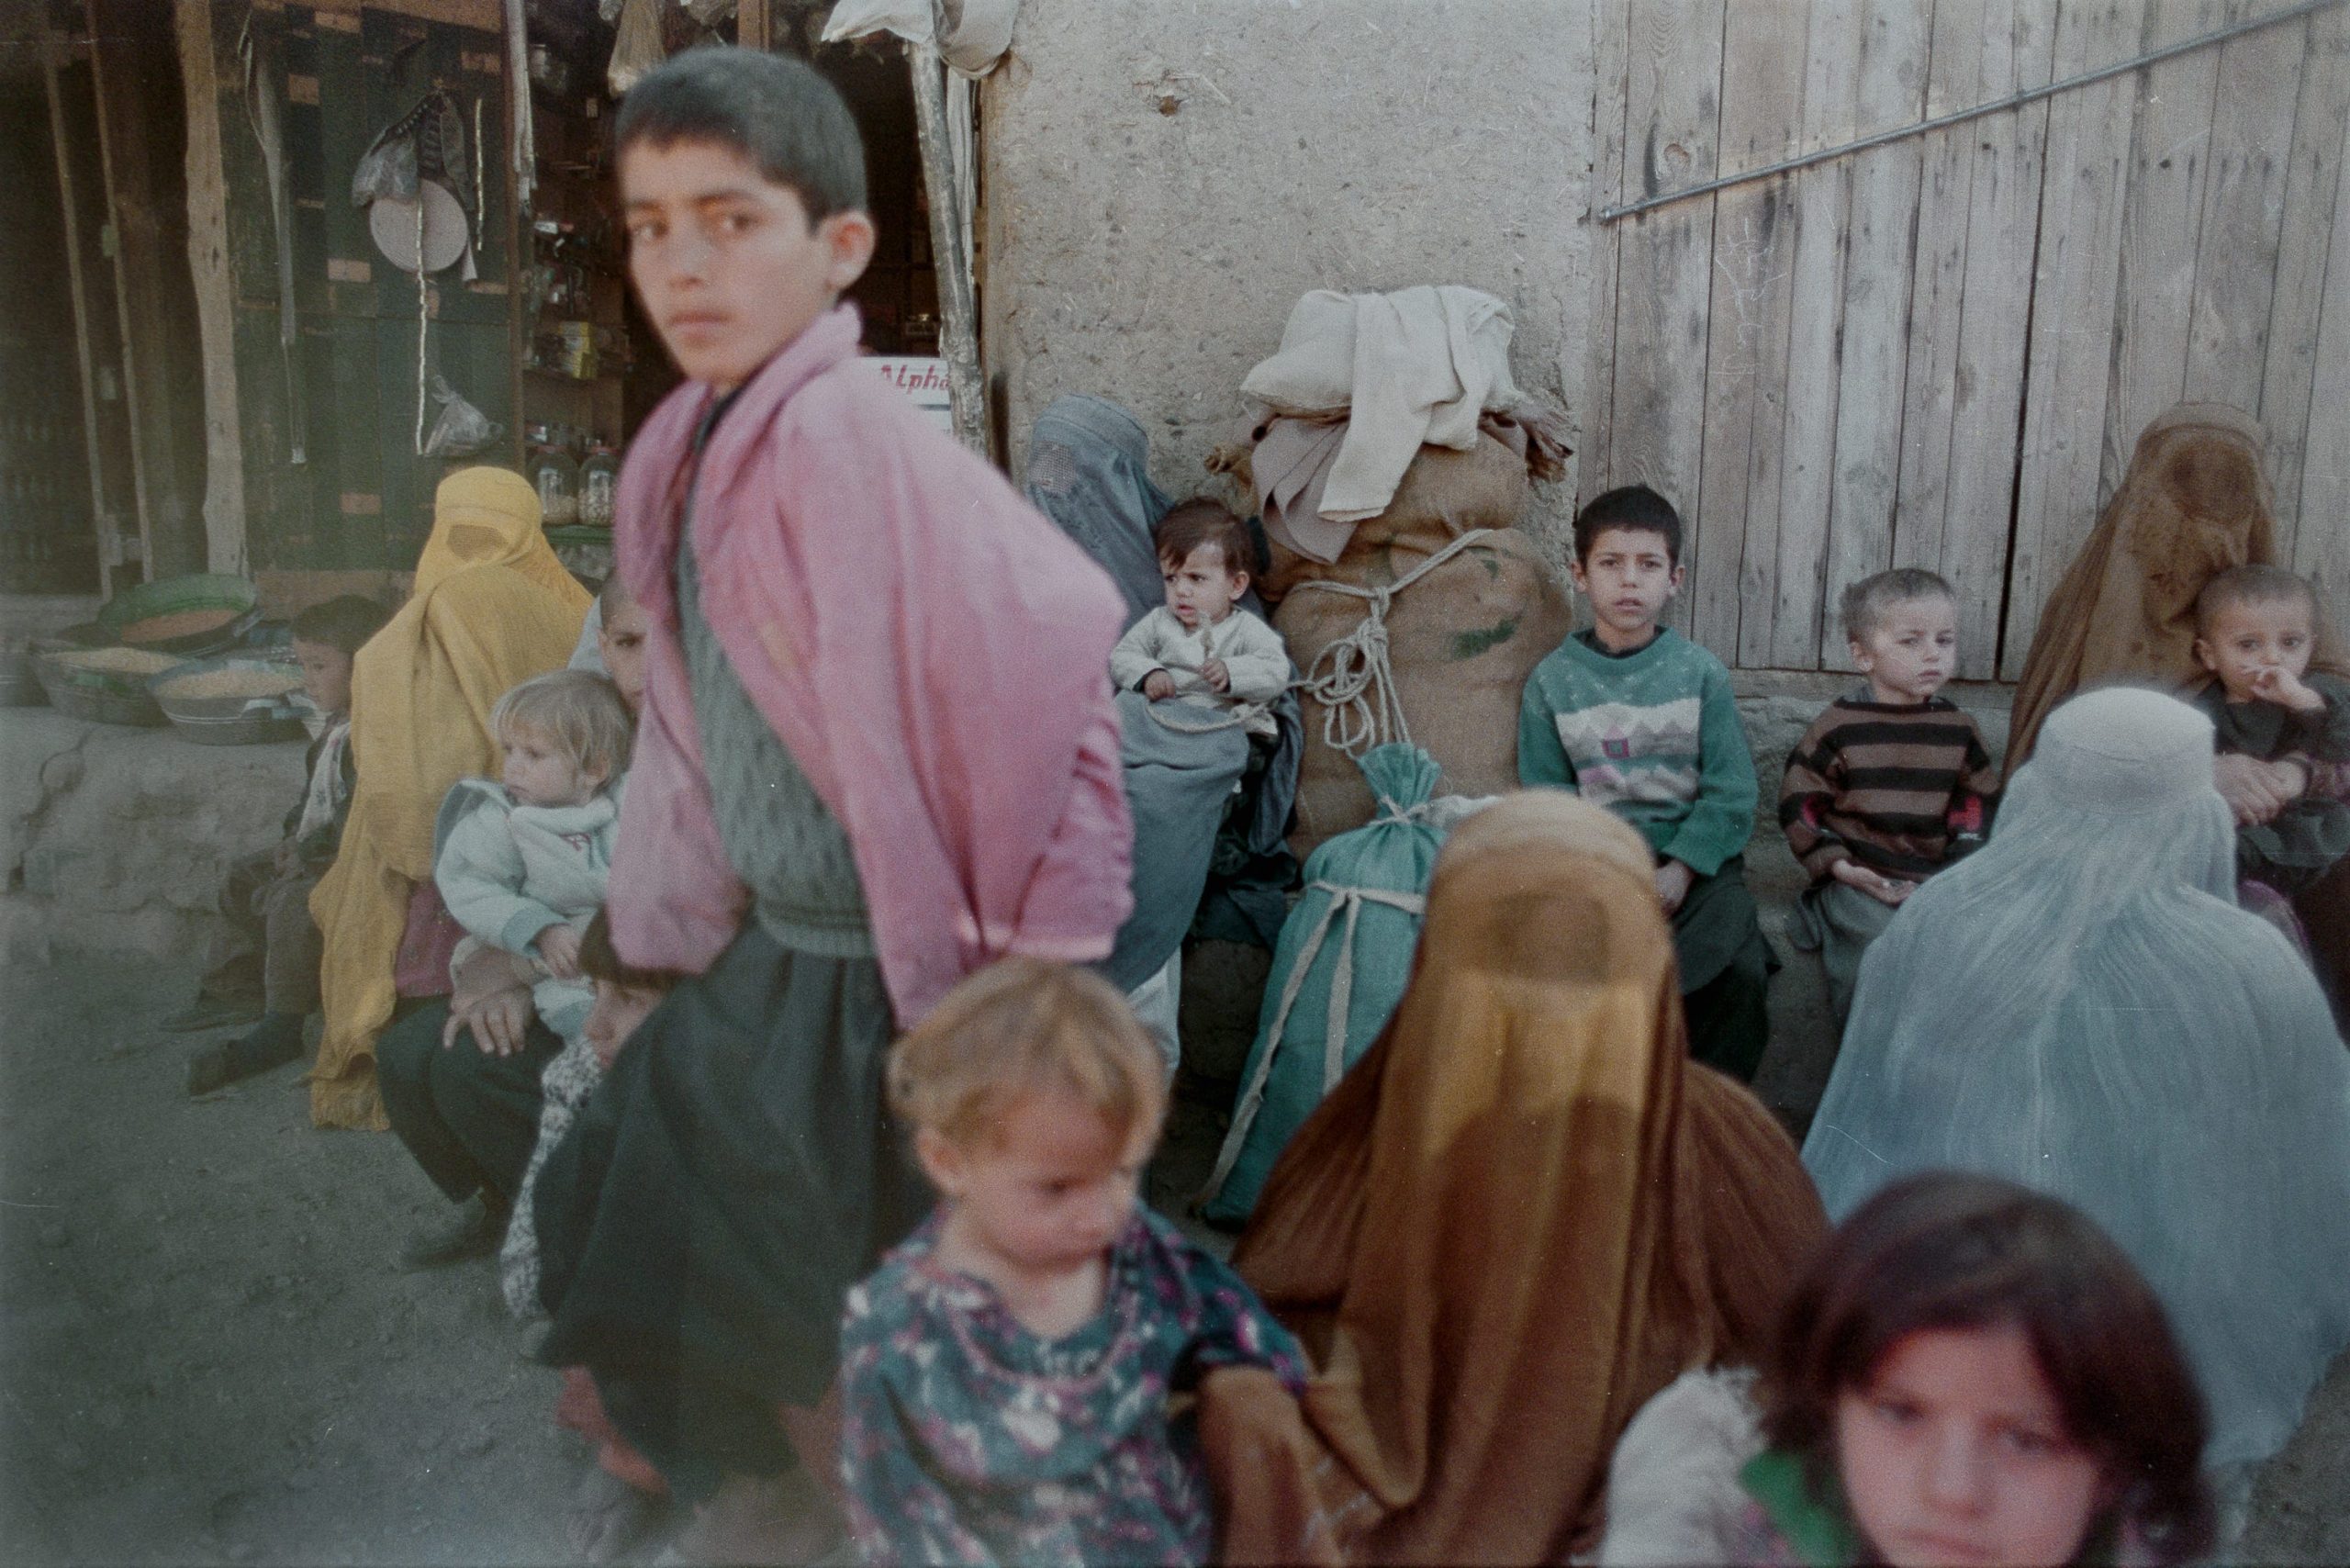 A crowd of boys are seen amid older women, who are fully covered in religious clothing.